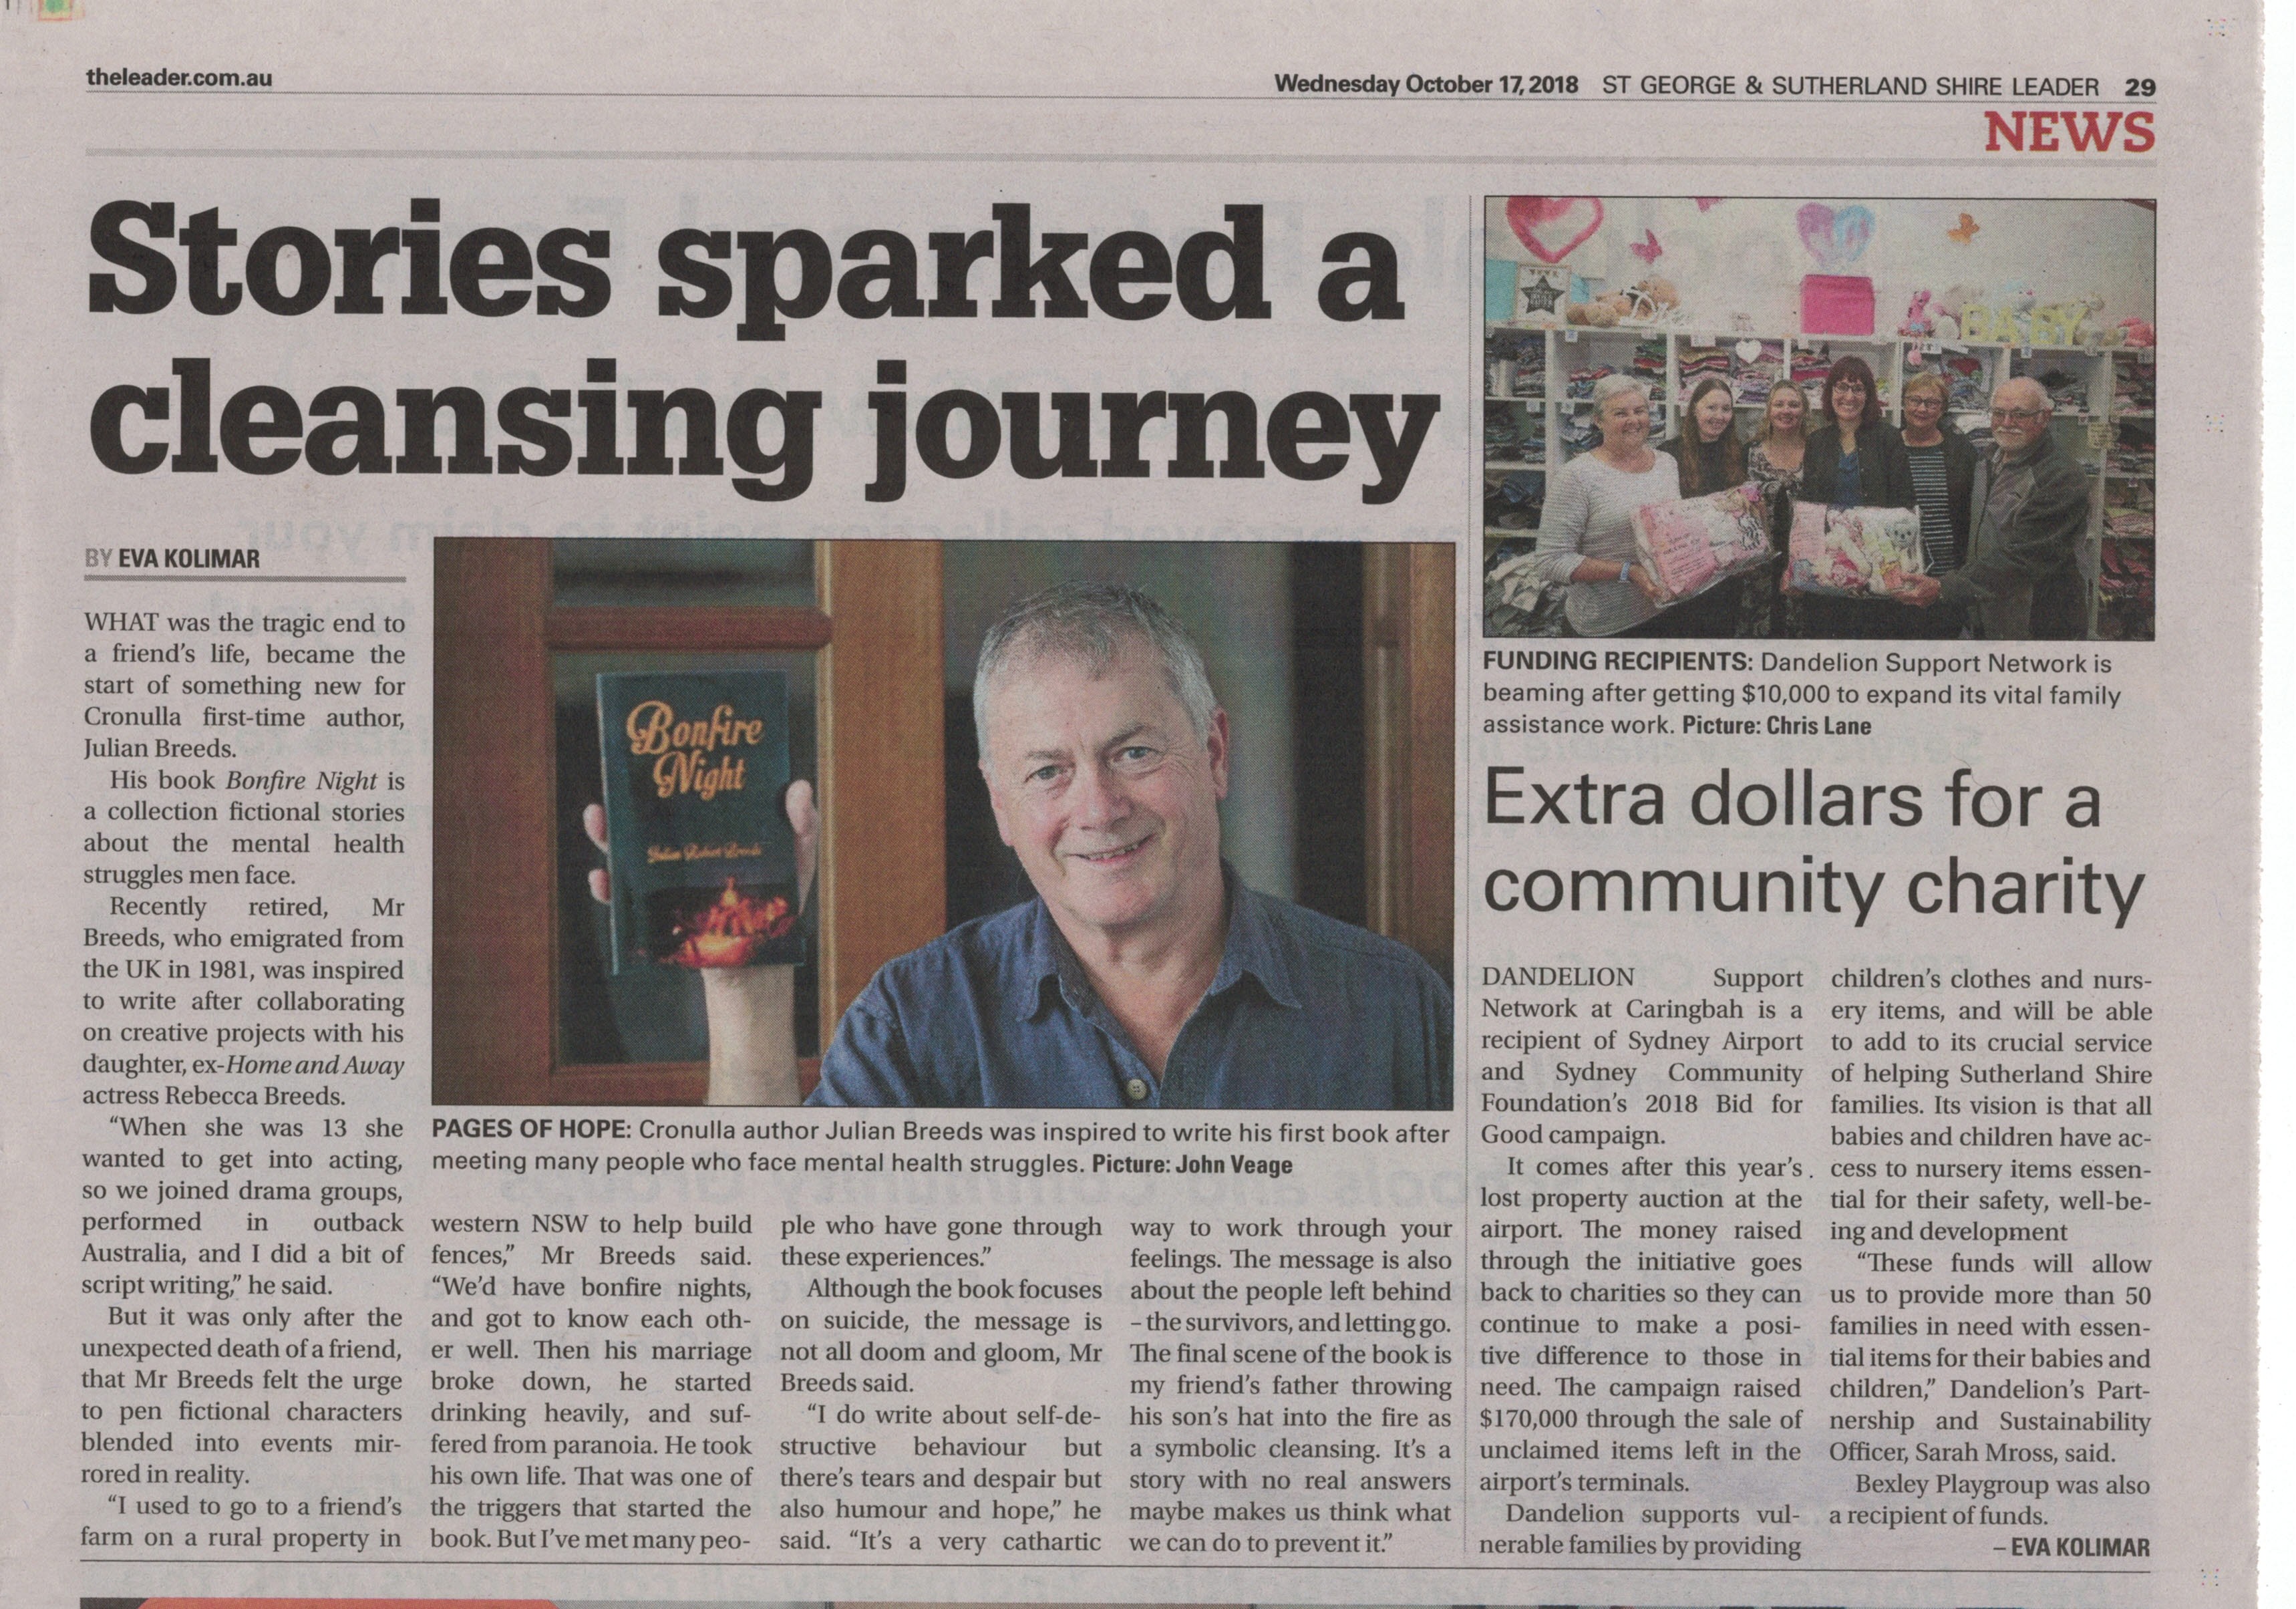 Julian Robert Breeds and his novel Bonfire Night Featured in Authors local newspaper